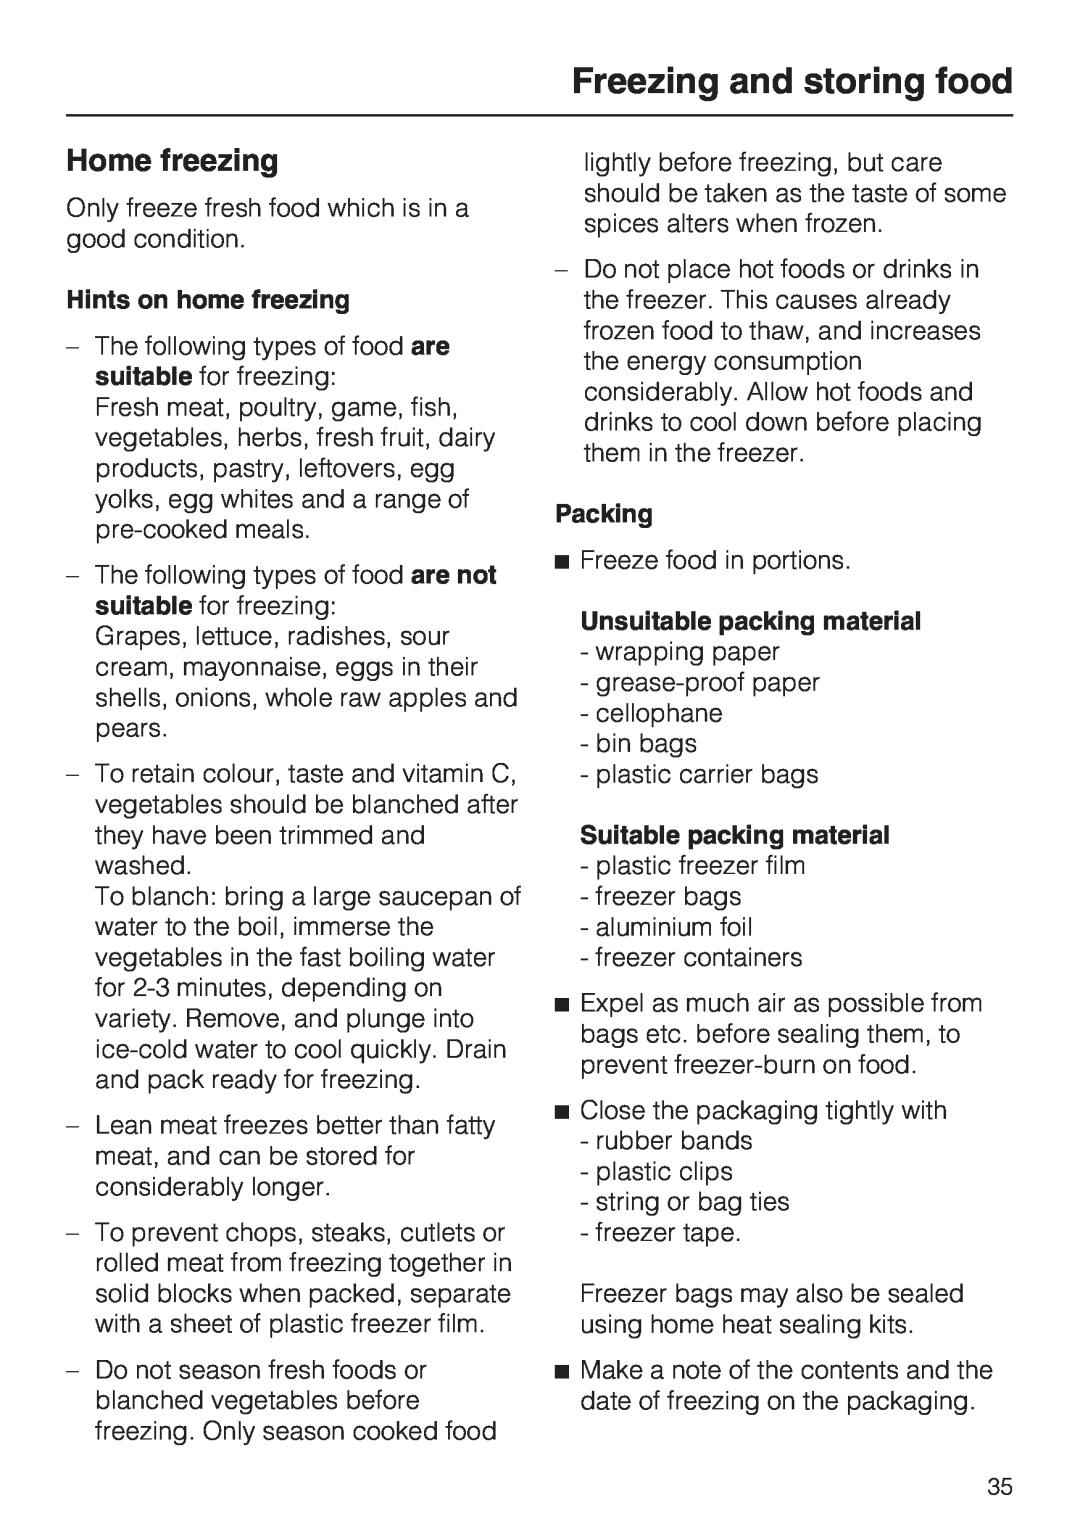 Miele KFN 14947 SDE ED Home freezing, Hints on home freezing, Packing, Unsuitable packing material 